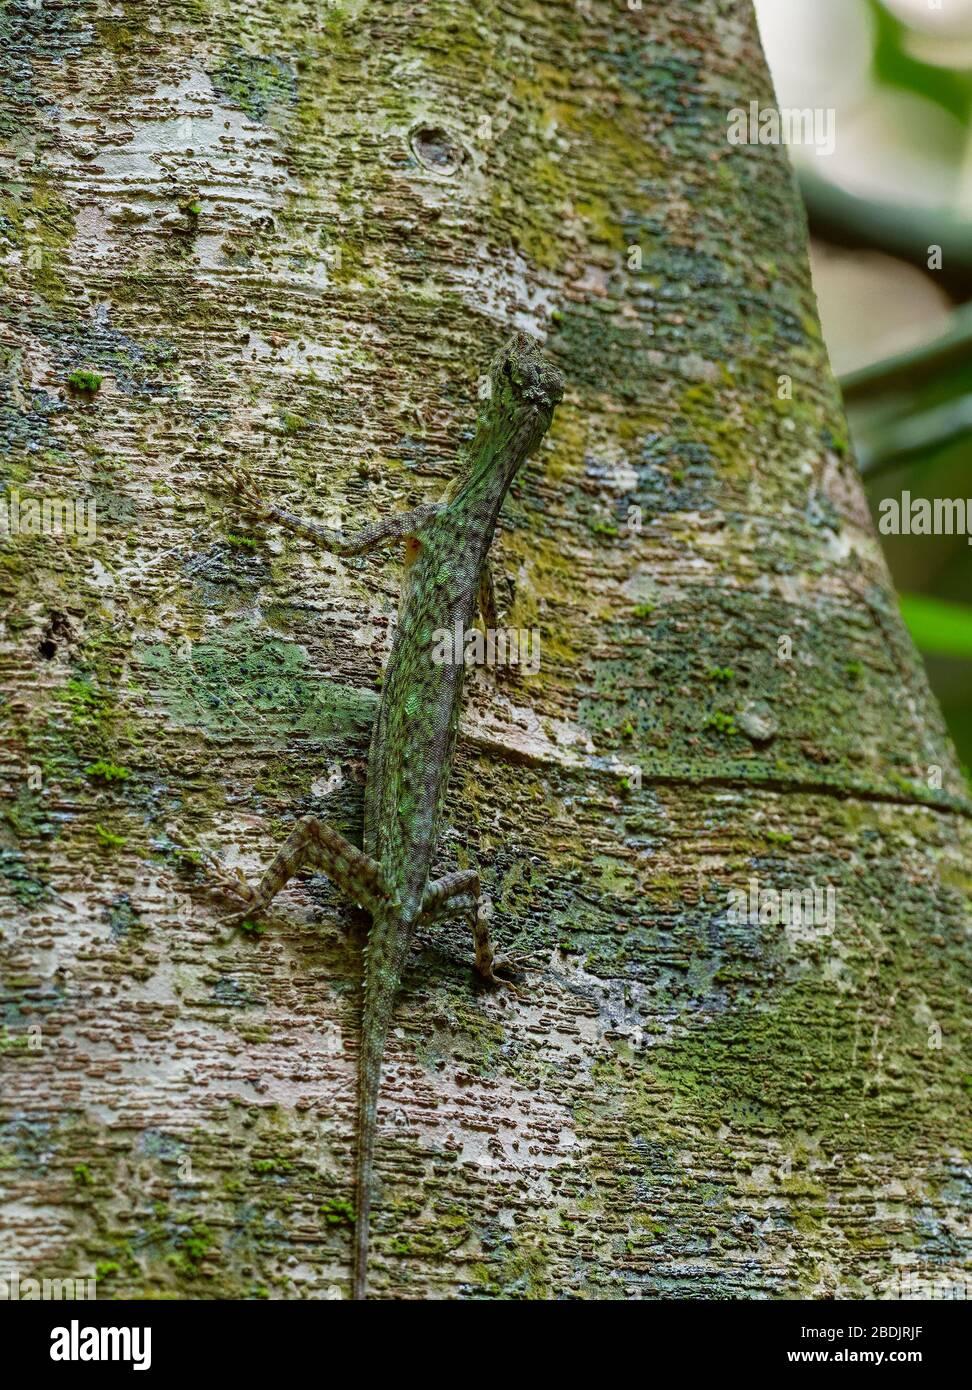 Barred gliding lizard - Draco taeniopterus - Draco is a genus of agamid lizards that are also known as flying lizards, flying dragons or gliding lizar Stock Photo